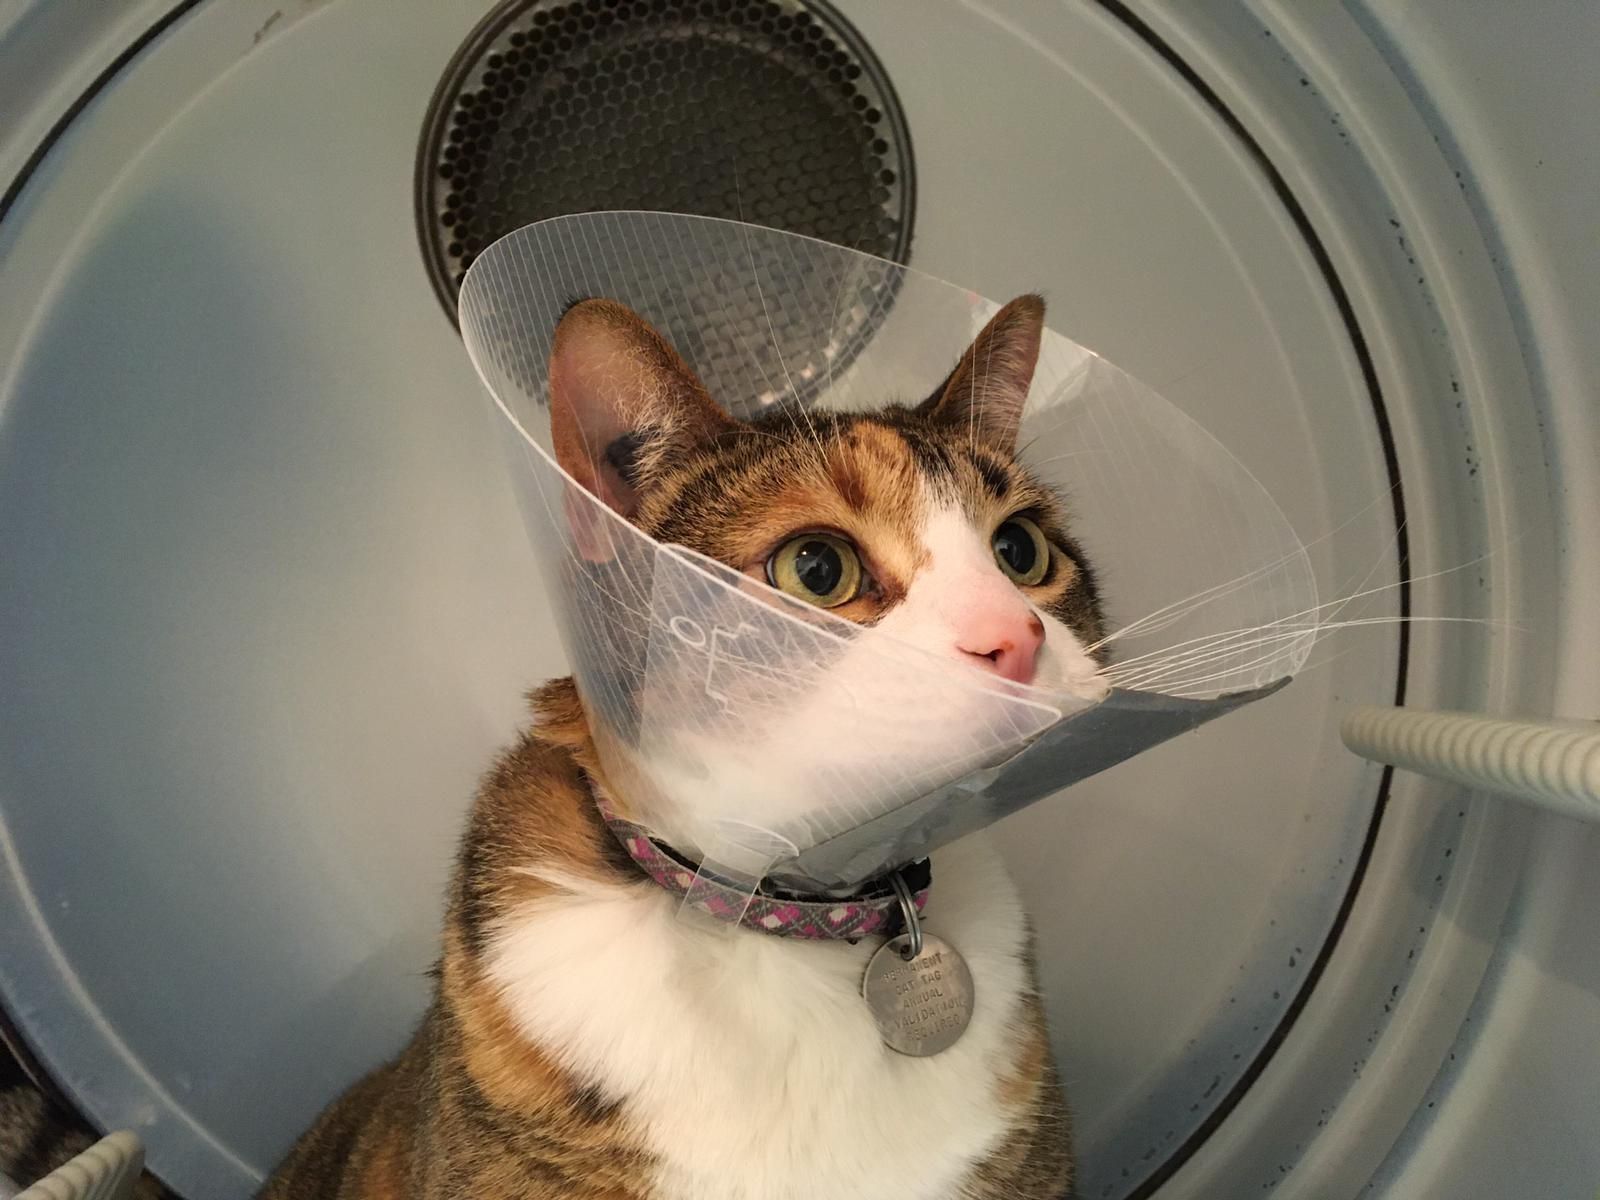 Gave our cat the cone, so she jumped into the dryer and it looked like she was commanding a space shuttle